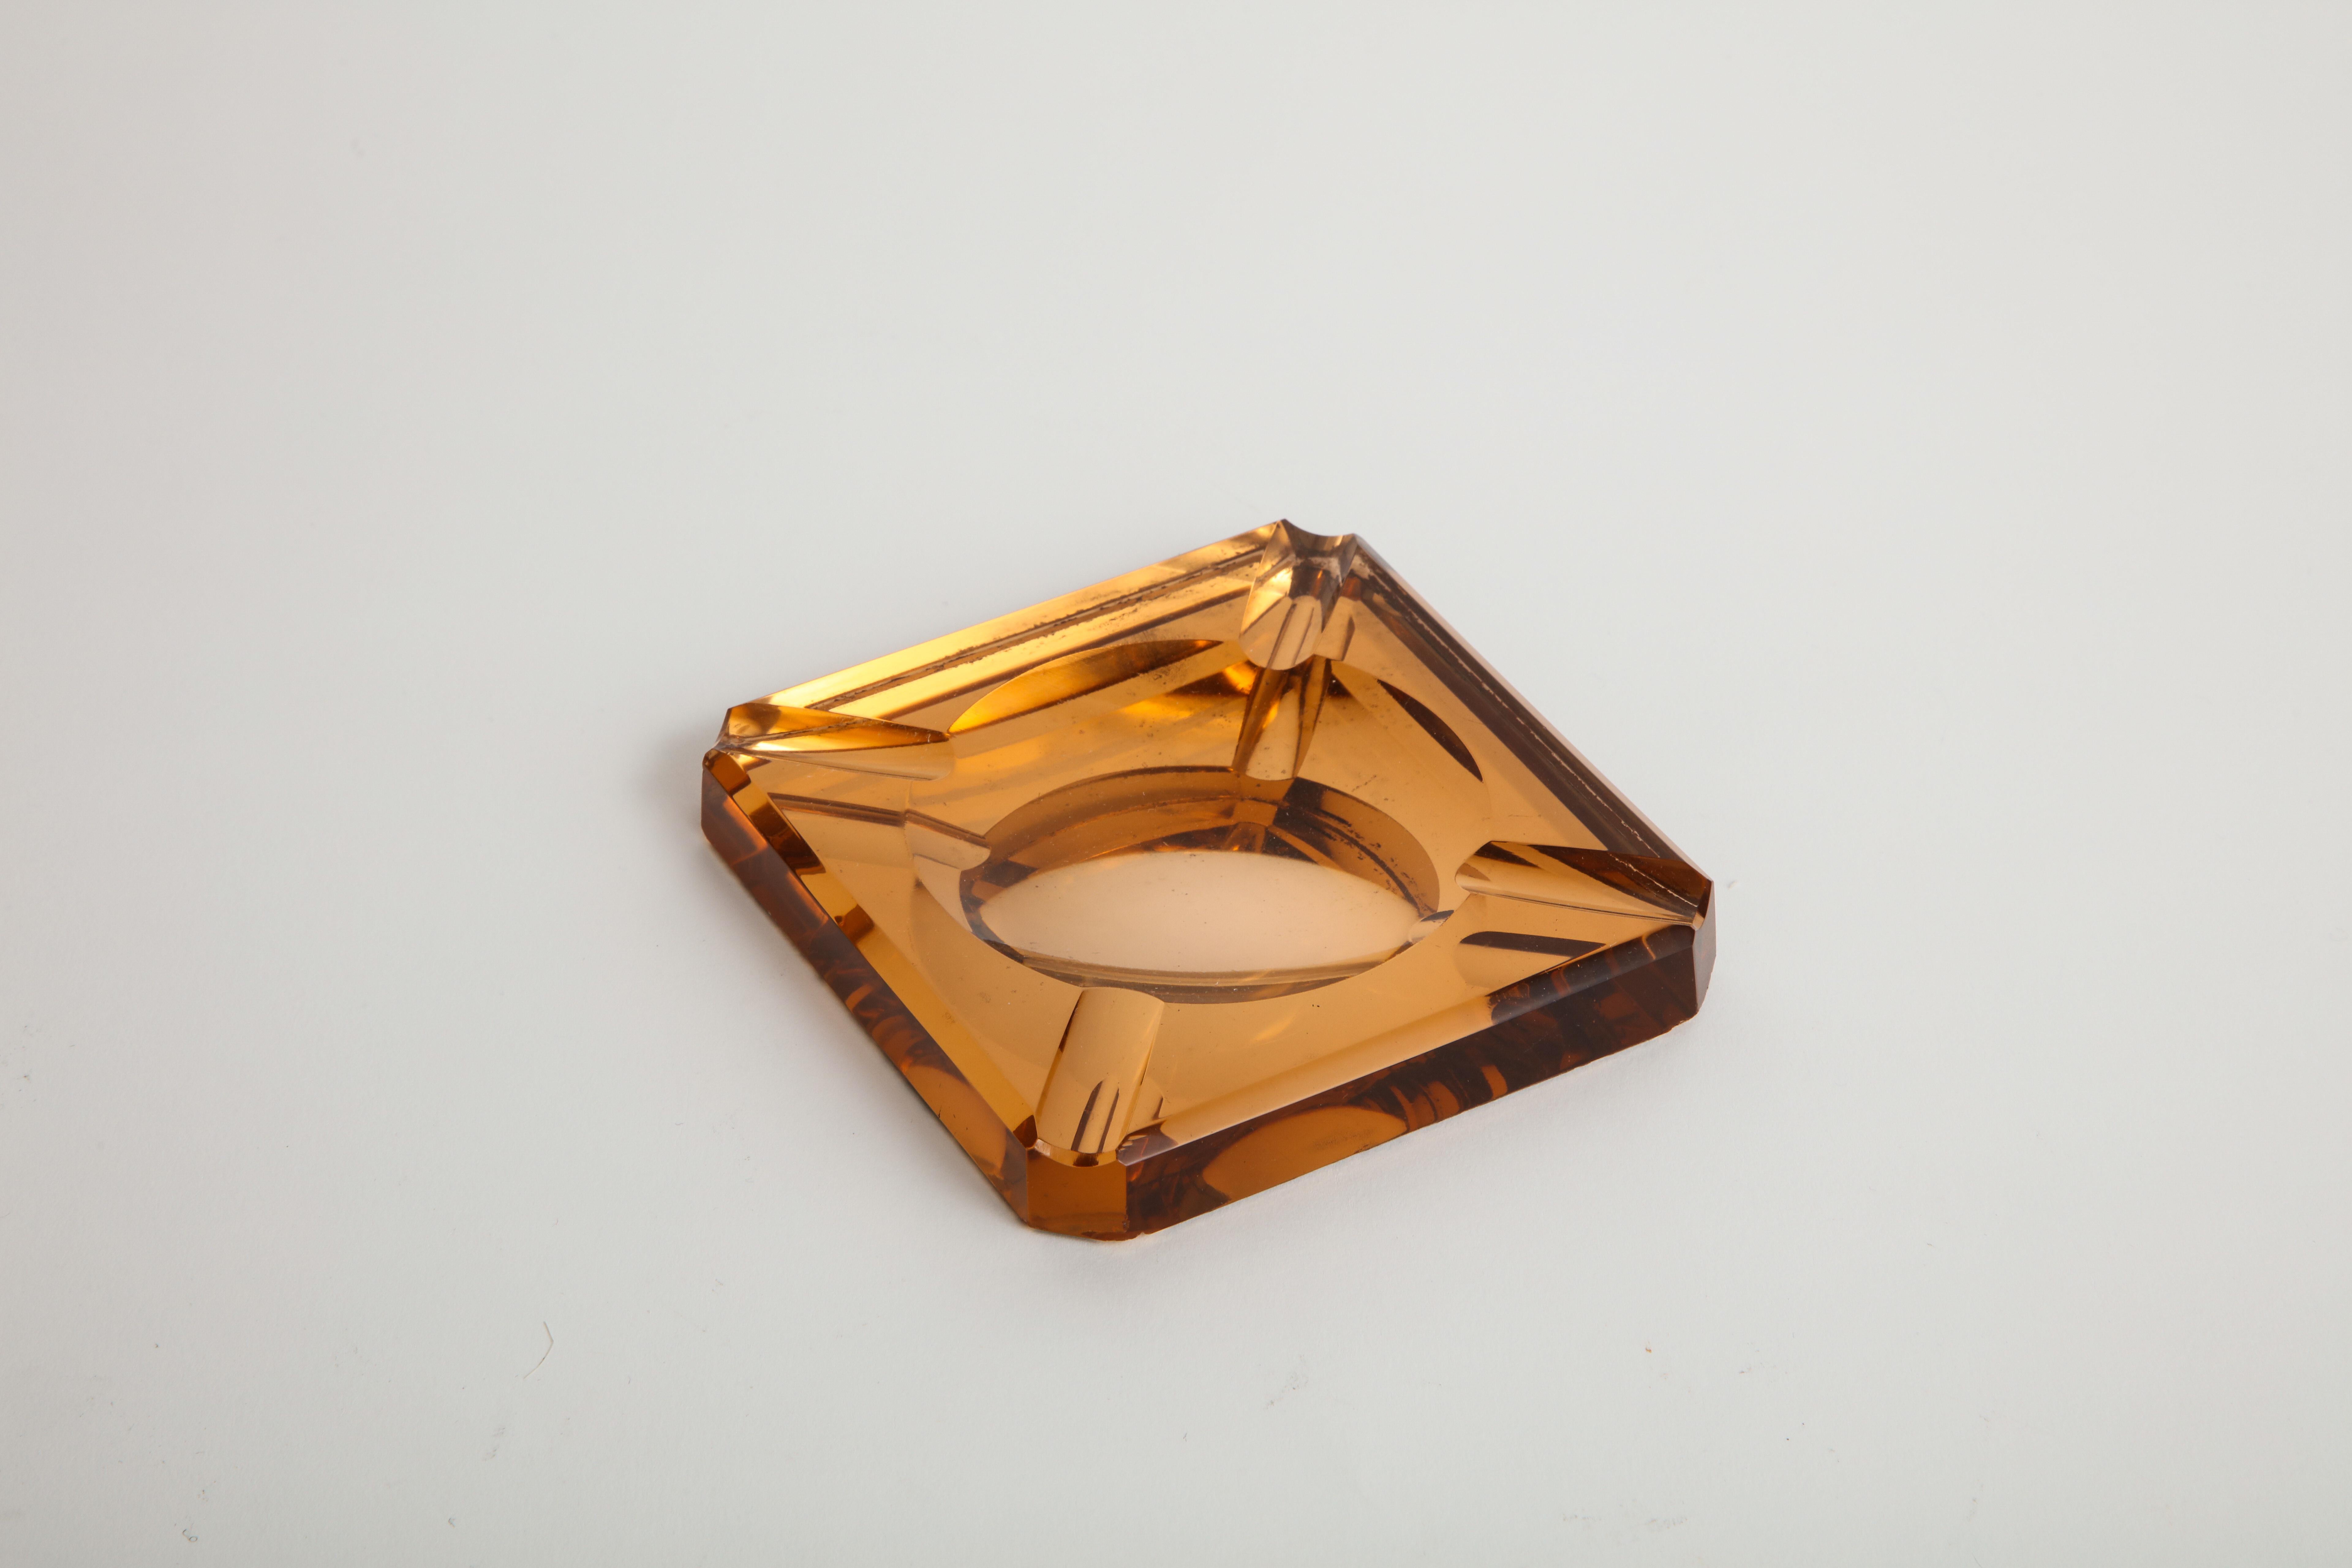 Chic reflective mirrored vintage amber glass catchall, or ashtray that emits an orange-y glow.